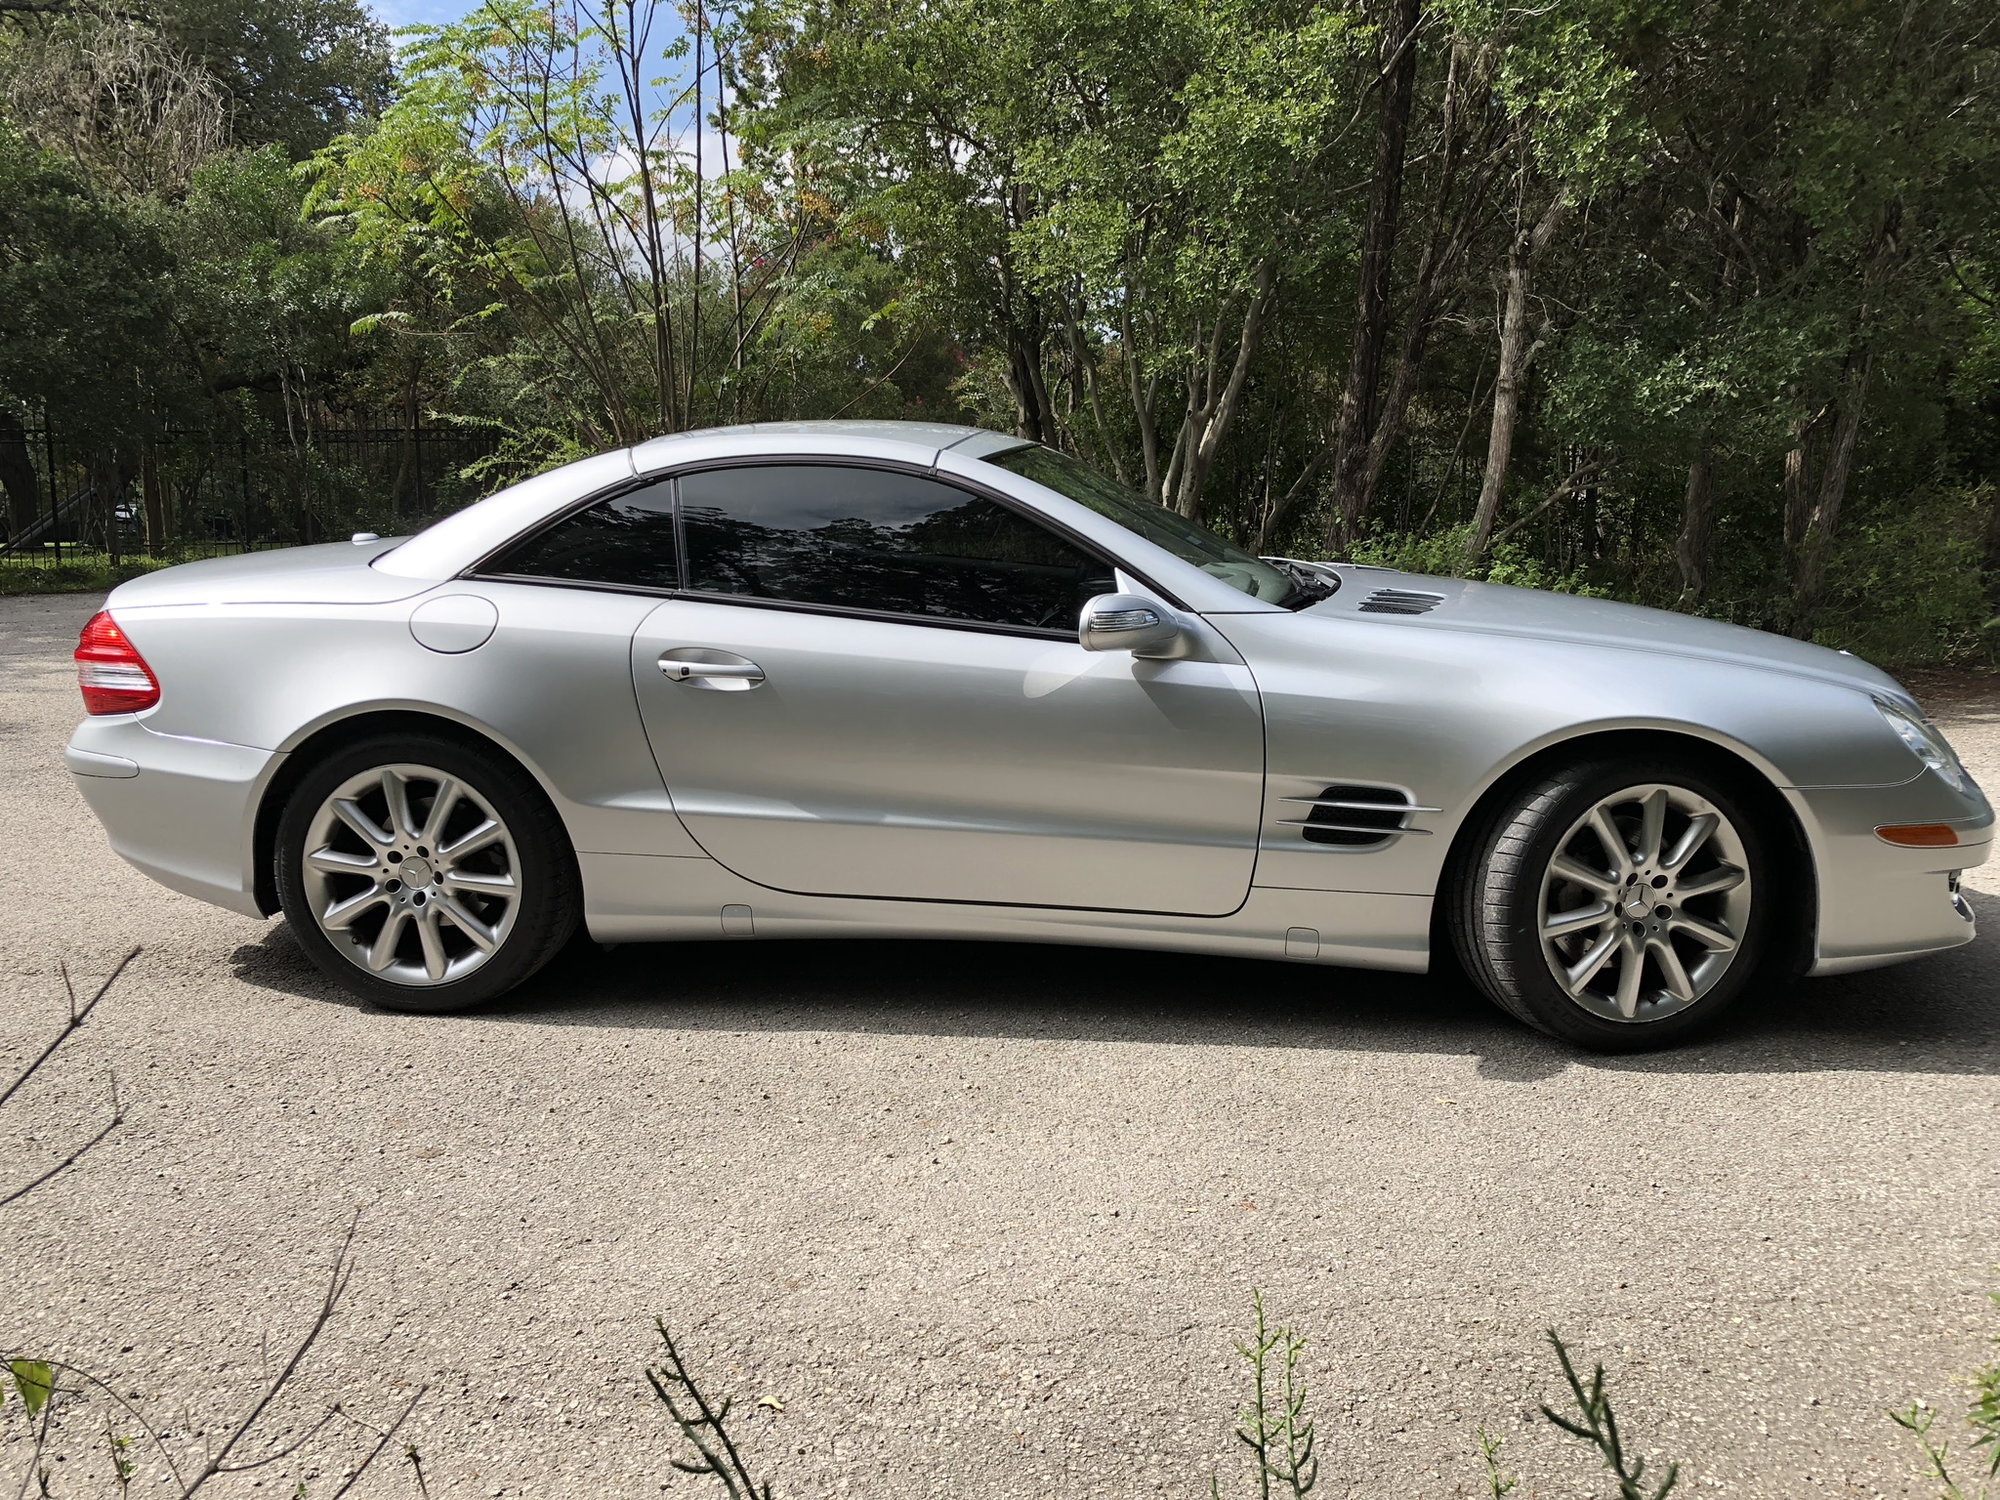 2007 Mercedes-Benz SL550 - Stunning 2007 Mercedes Benz SL 550 for sale - Used - VIN WDBSK71F87F124344 - 42,875 Miles - 8 cyl - 2WD - Automatic - Convertible - Silver - New Braunfels, TX 78130, United States